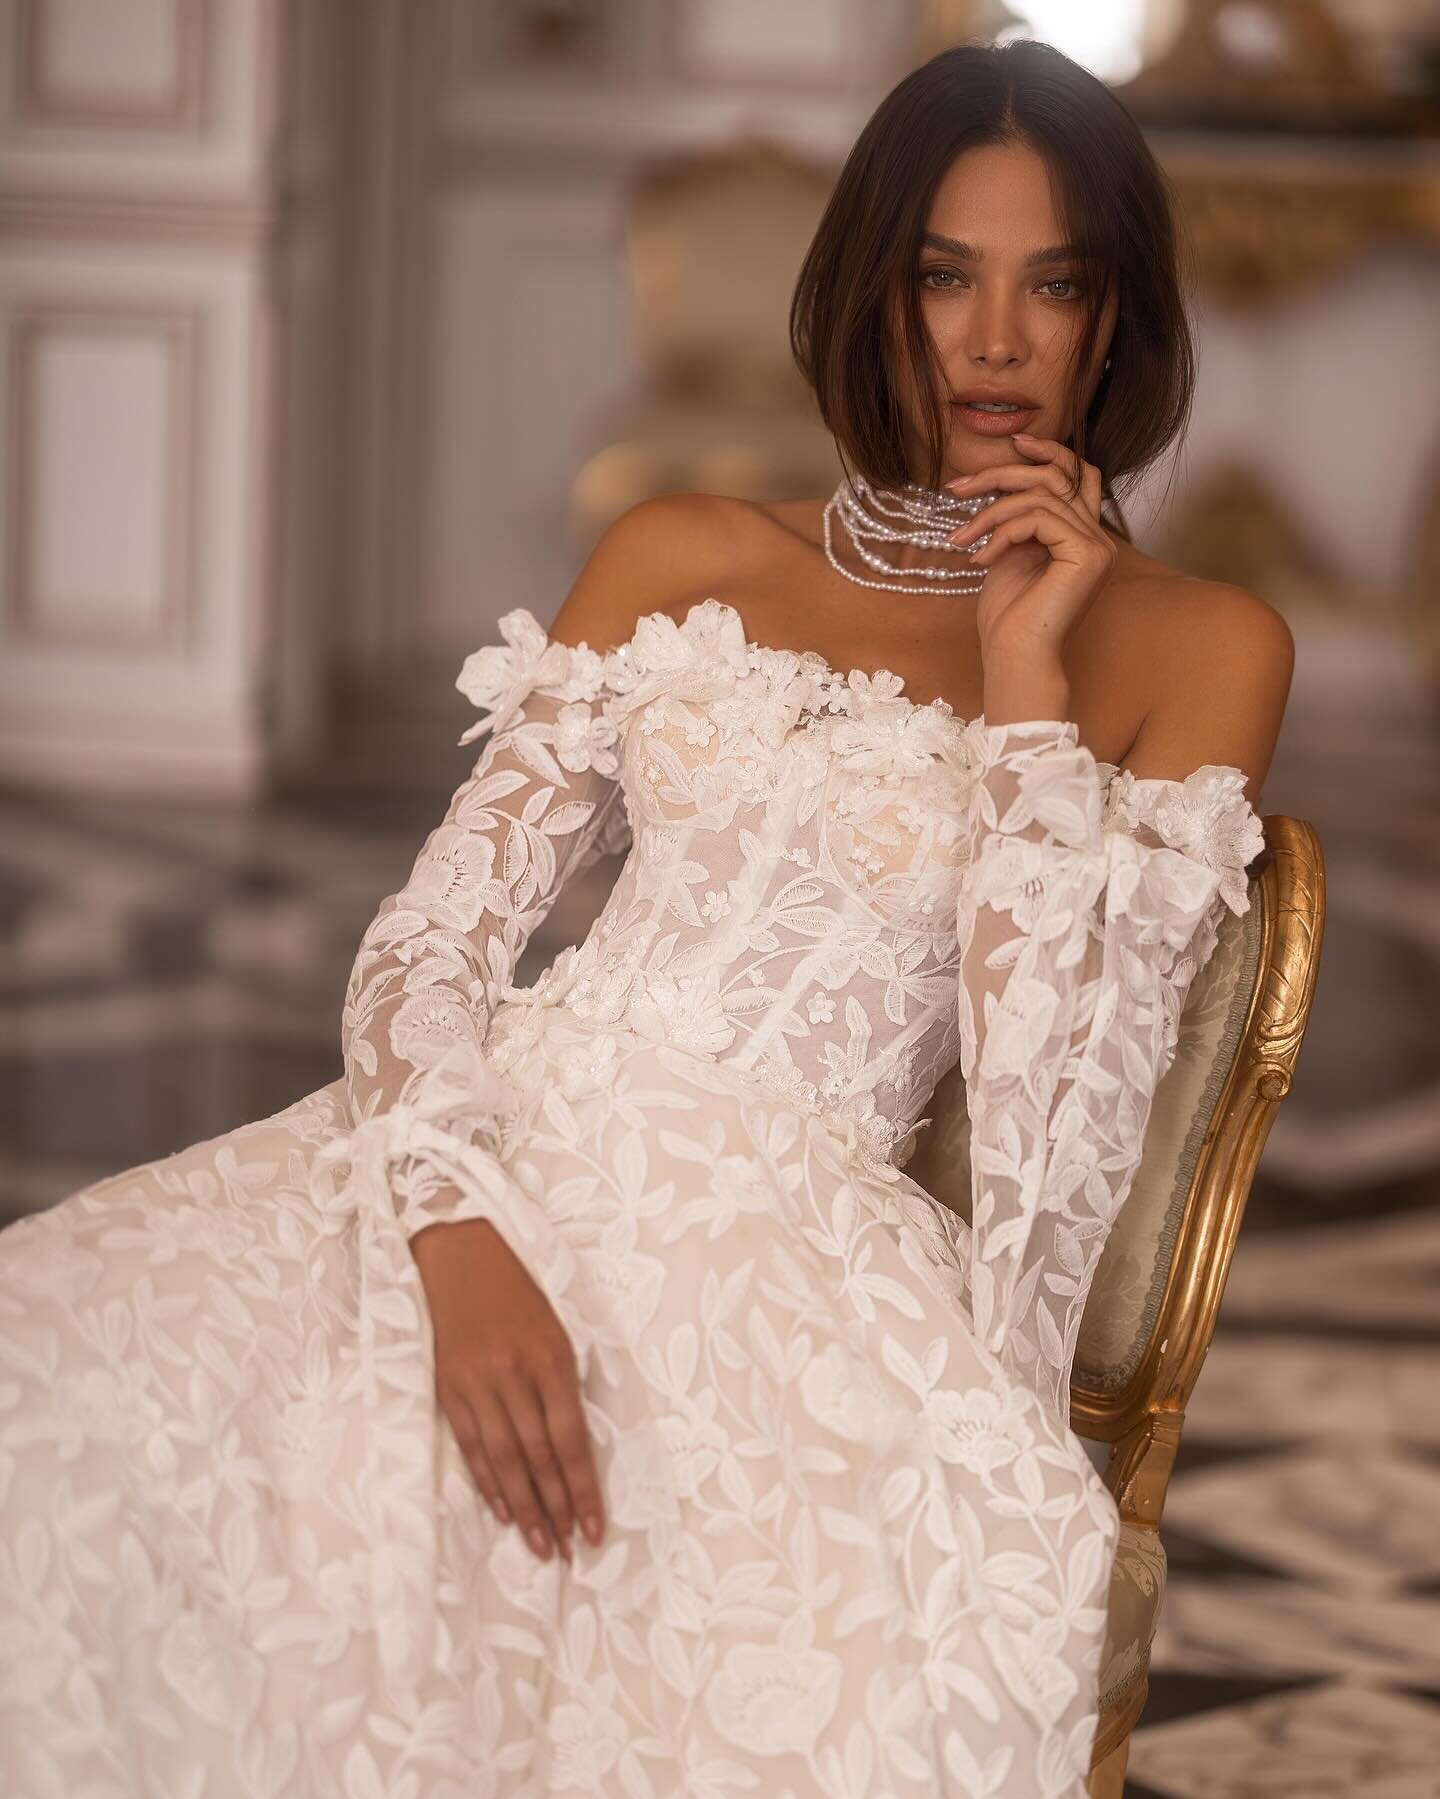 The ultimate winter wedding dress doesn&rsquo;t ex&hellip; oh wait a minute! The ultimate winter wedding dress does exist and her name is FLORA! 🌸🩷 She is waiting for you to try her on, book your private bridal consultation with us to experience th